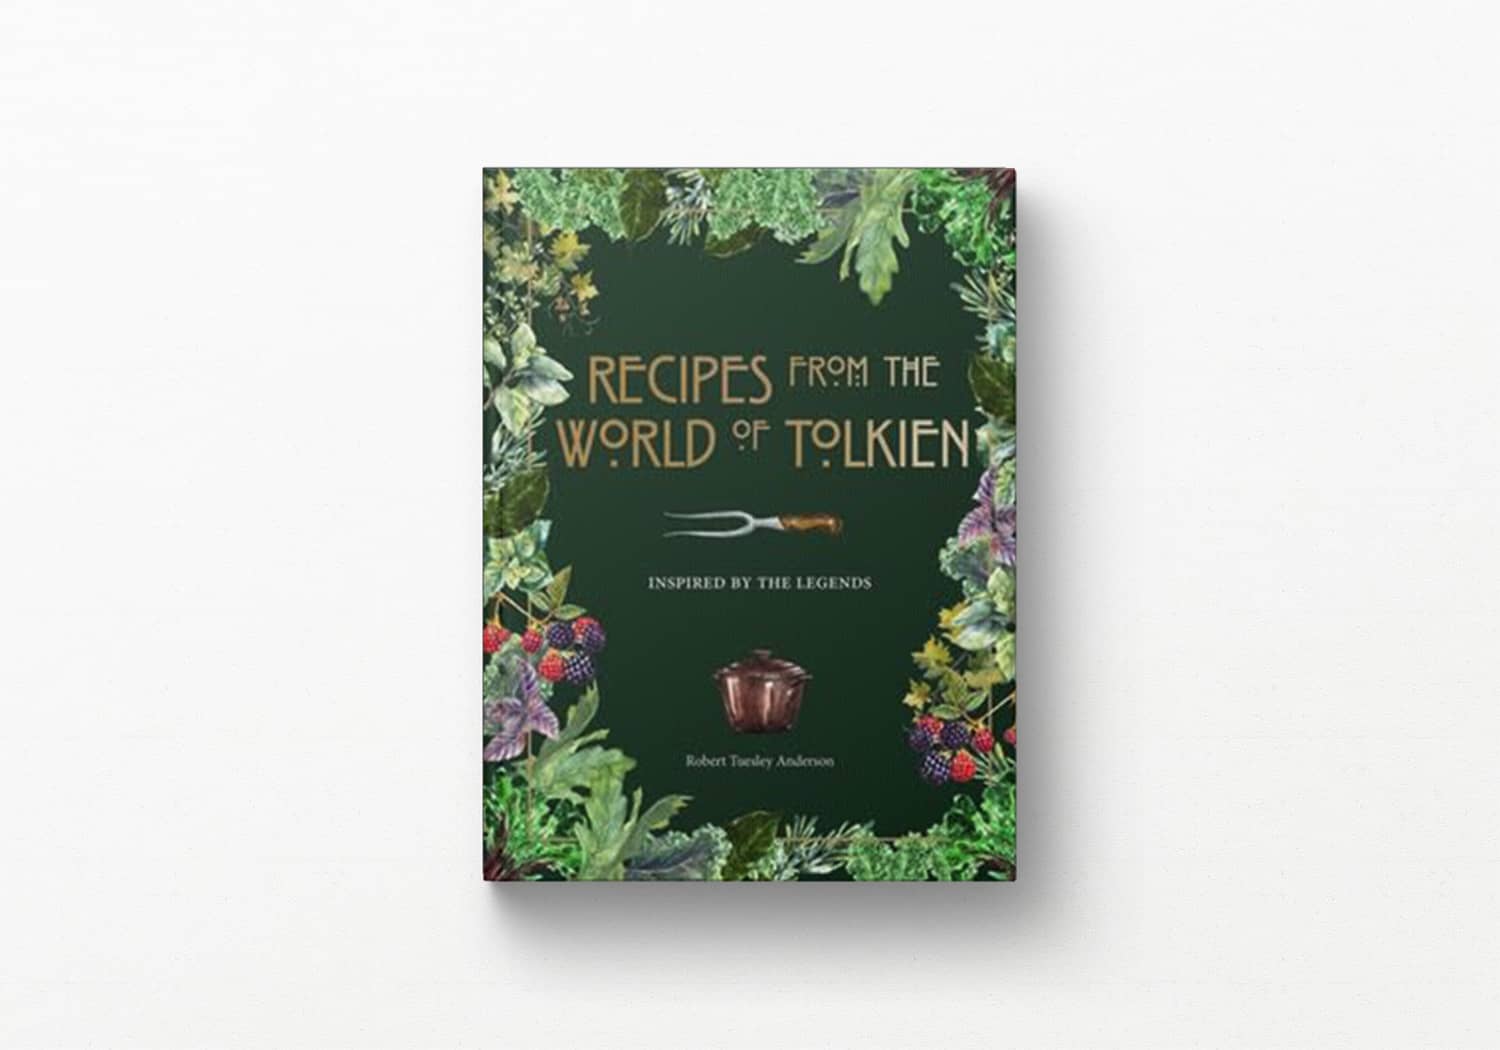 Recipes from the World of Tolkien: Inspired by the Legends